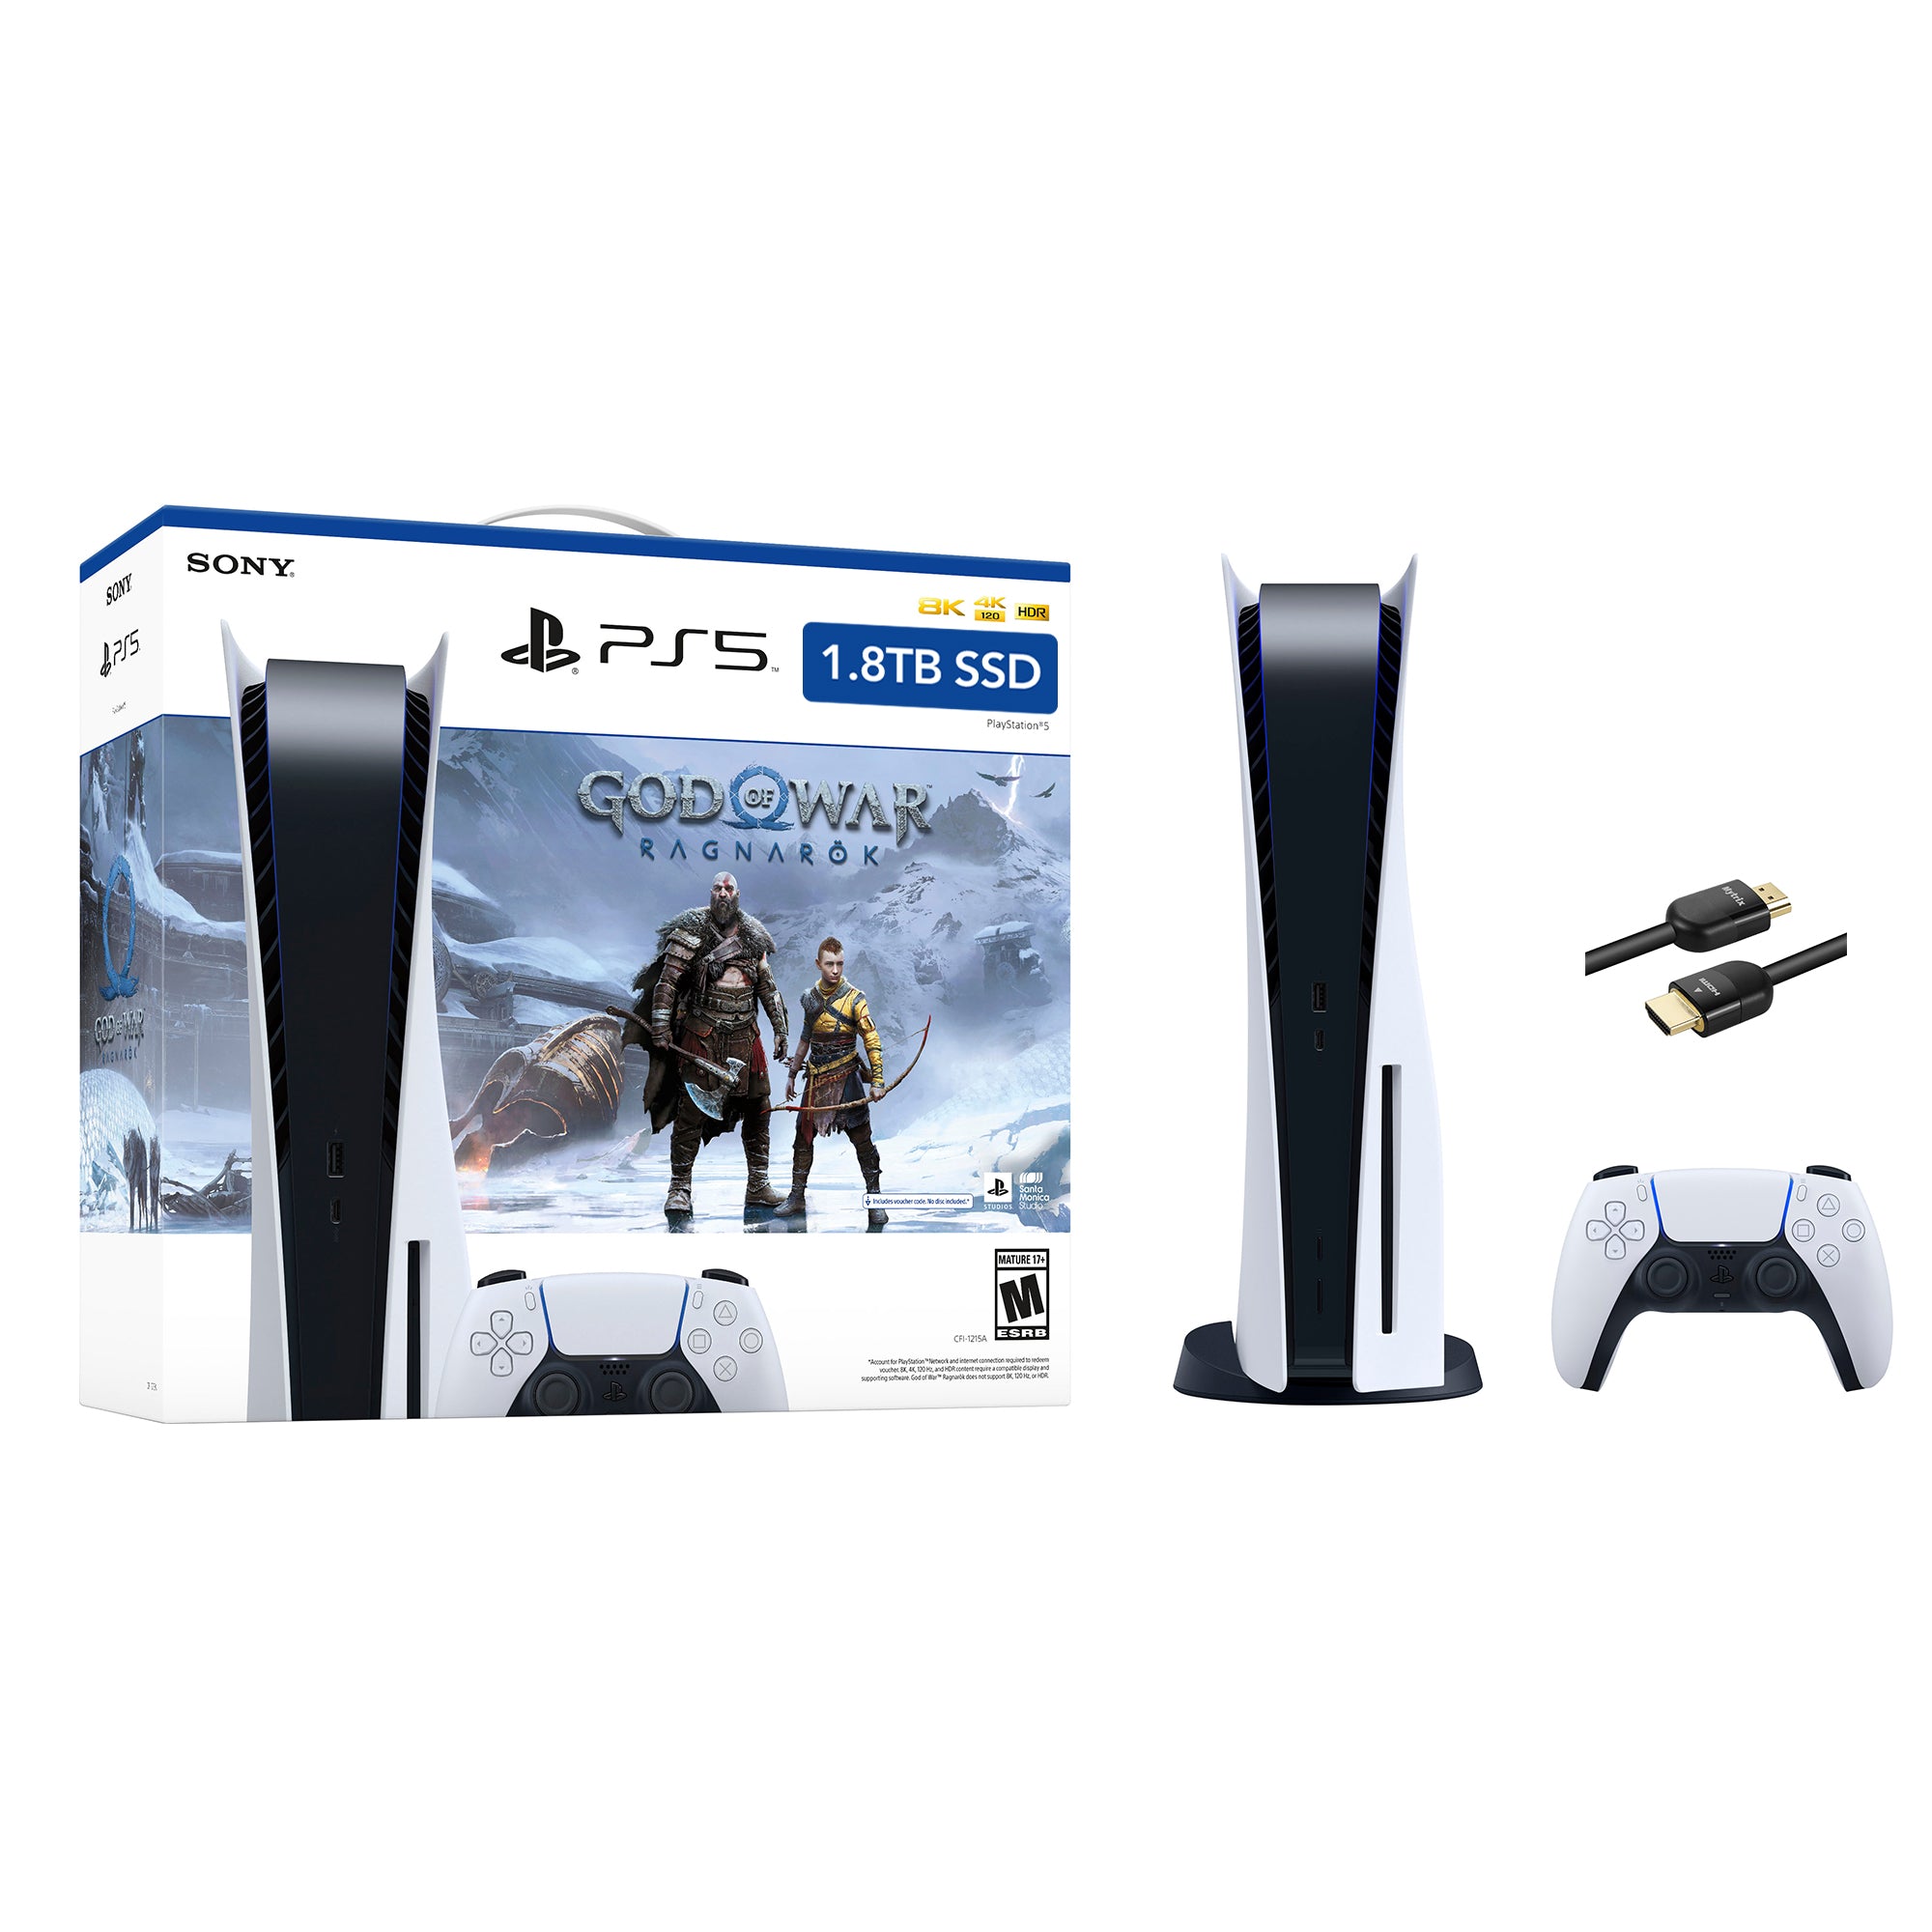 PlayStation 5 Upgraded 1.8TB Disc Edition God of War Ragnarok Bundle and Mytrix 8K HDMI Ultra High Speed Cable - White, PS5 Gaming Console